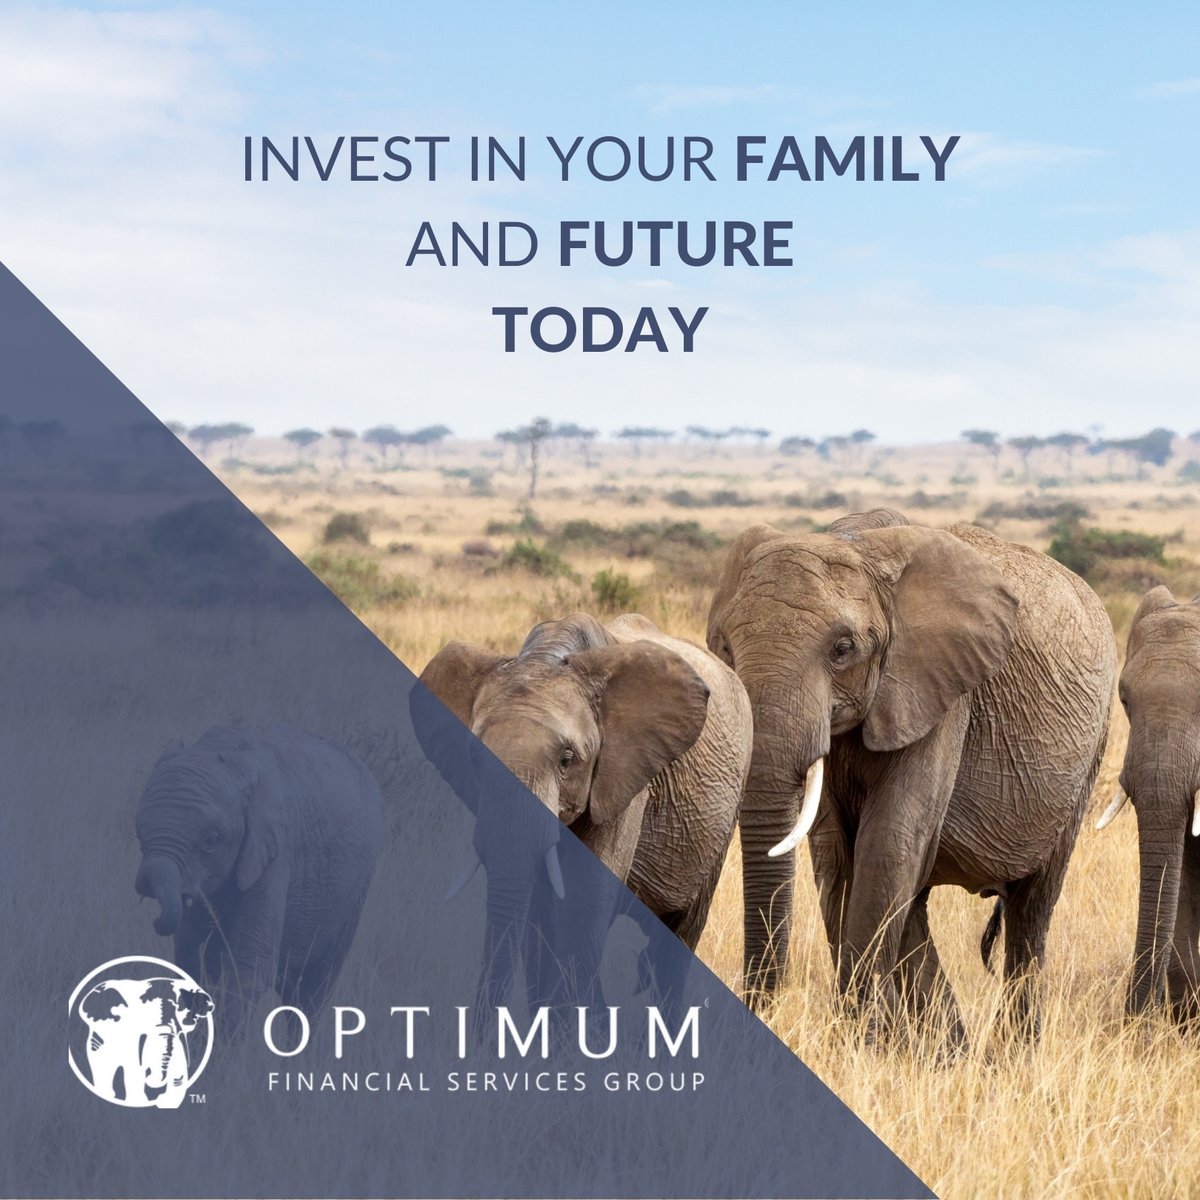 Investing in your future for your family is a long-term strategy. 
Start today. 
start@optimumgroup.co.za
https://t.co/h319V0GicW
#Optimum #finance #financialservices #investments #investing https://t.co/Wt1vfXDVmS